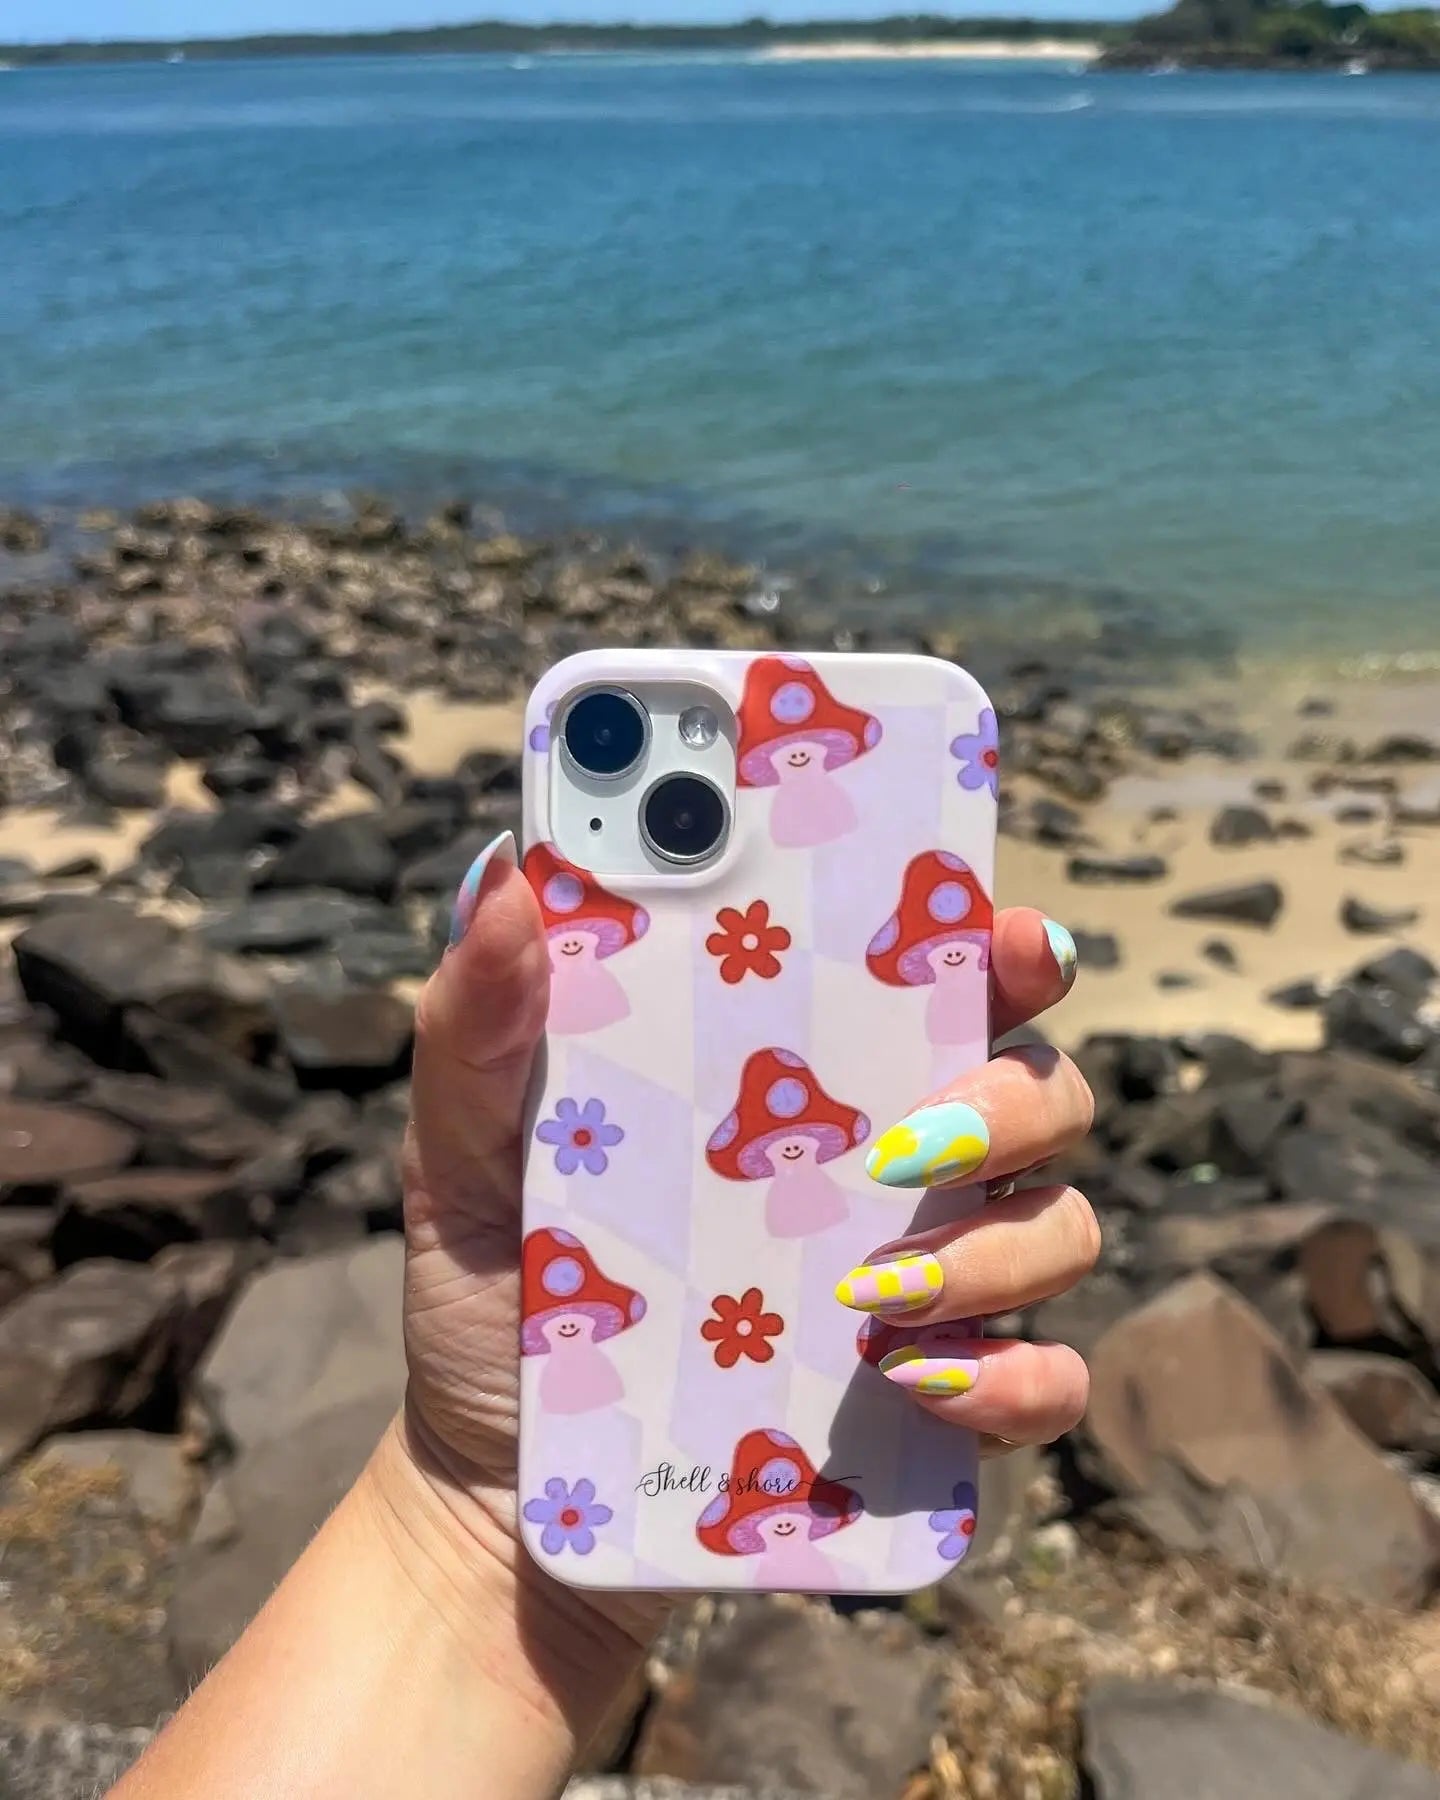 Magical Wonderland iPhone Case Shell And Shore